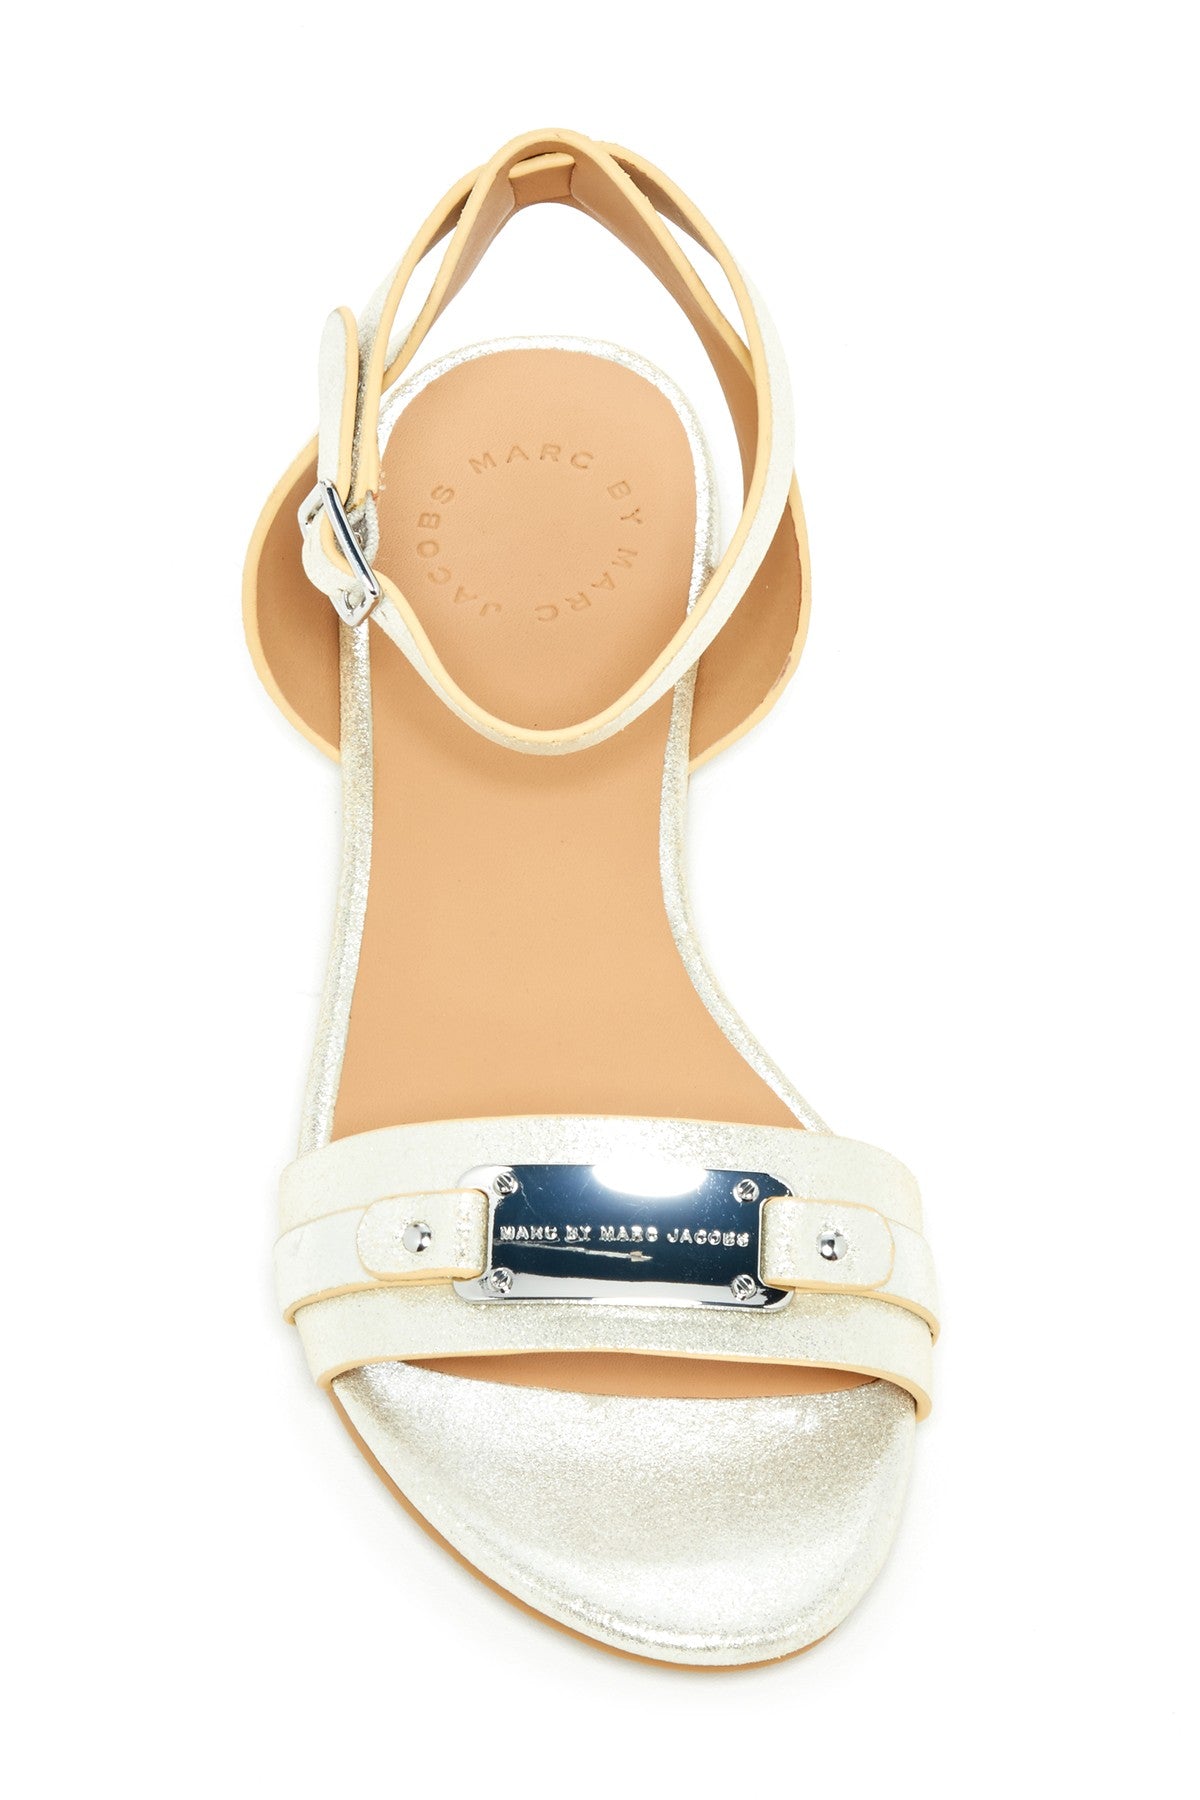 Marc by Marc Jacobs Womens M9000202 Yellow Marc Jacobs Sandal